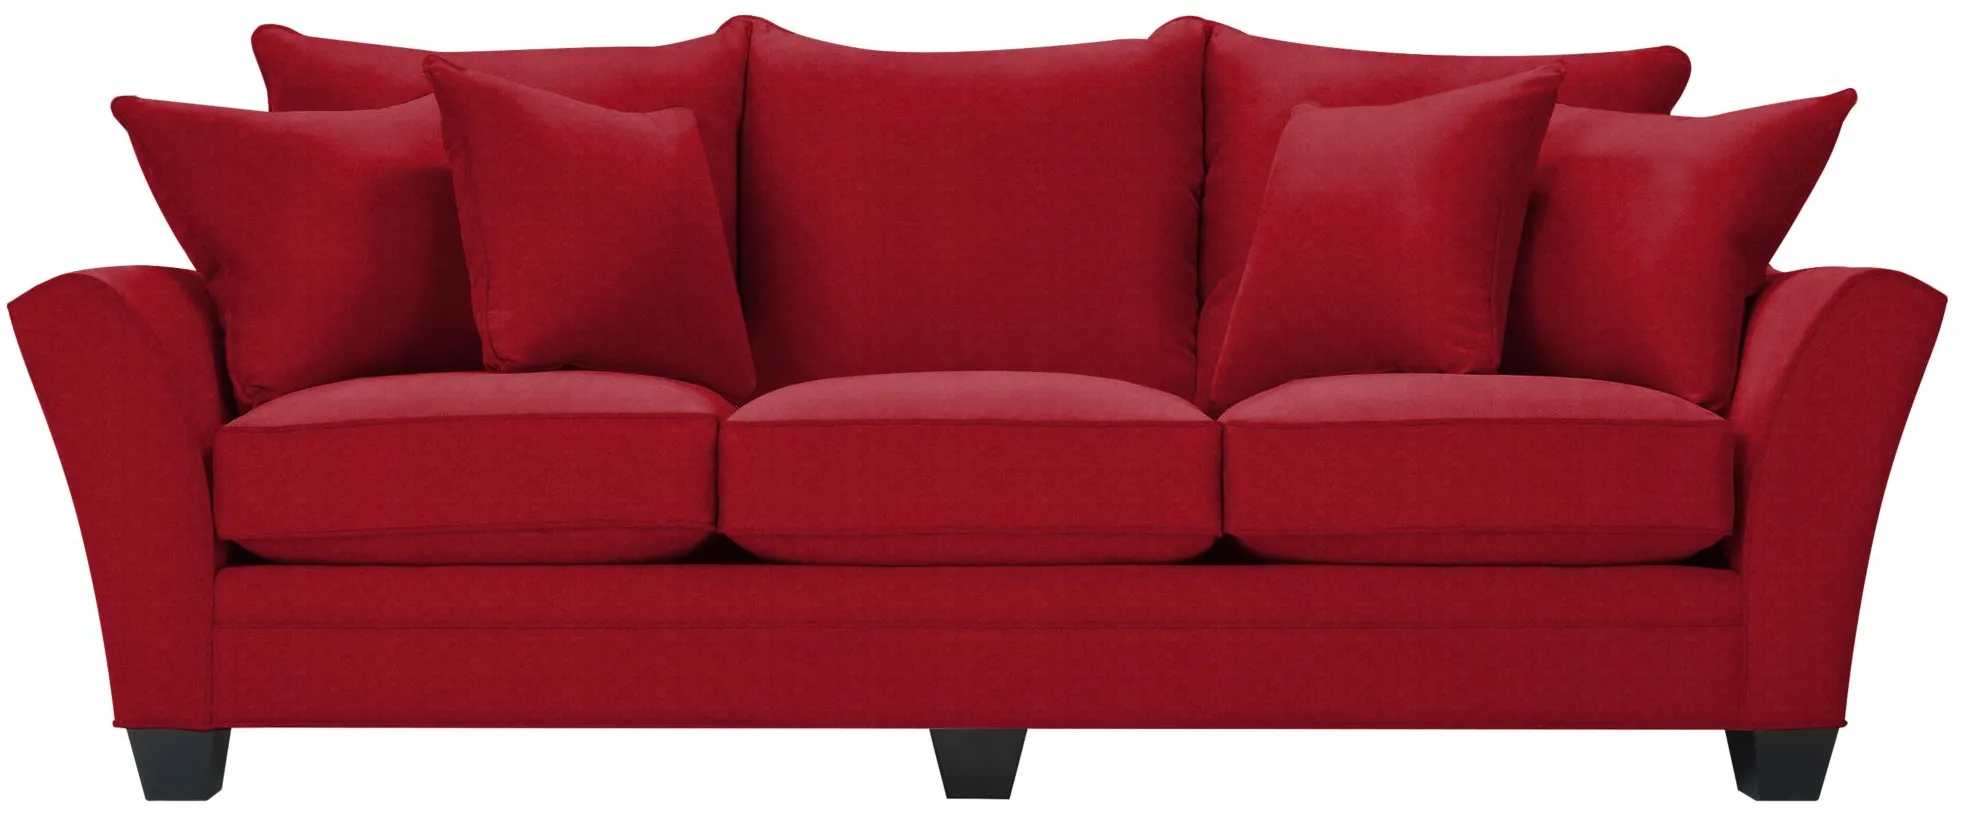 Briarwood Queen Plus Sleeper Sofa in Suede So Soft Cardinal by H.M. Richards